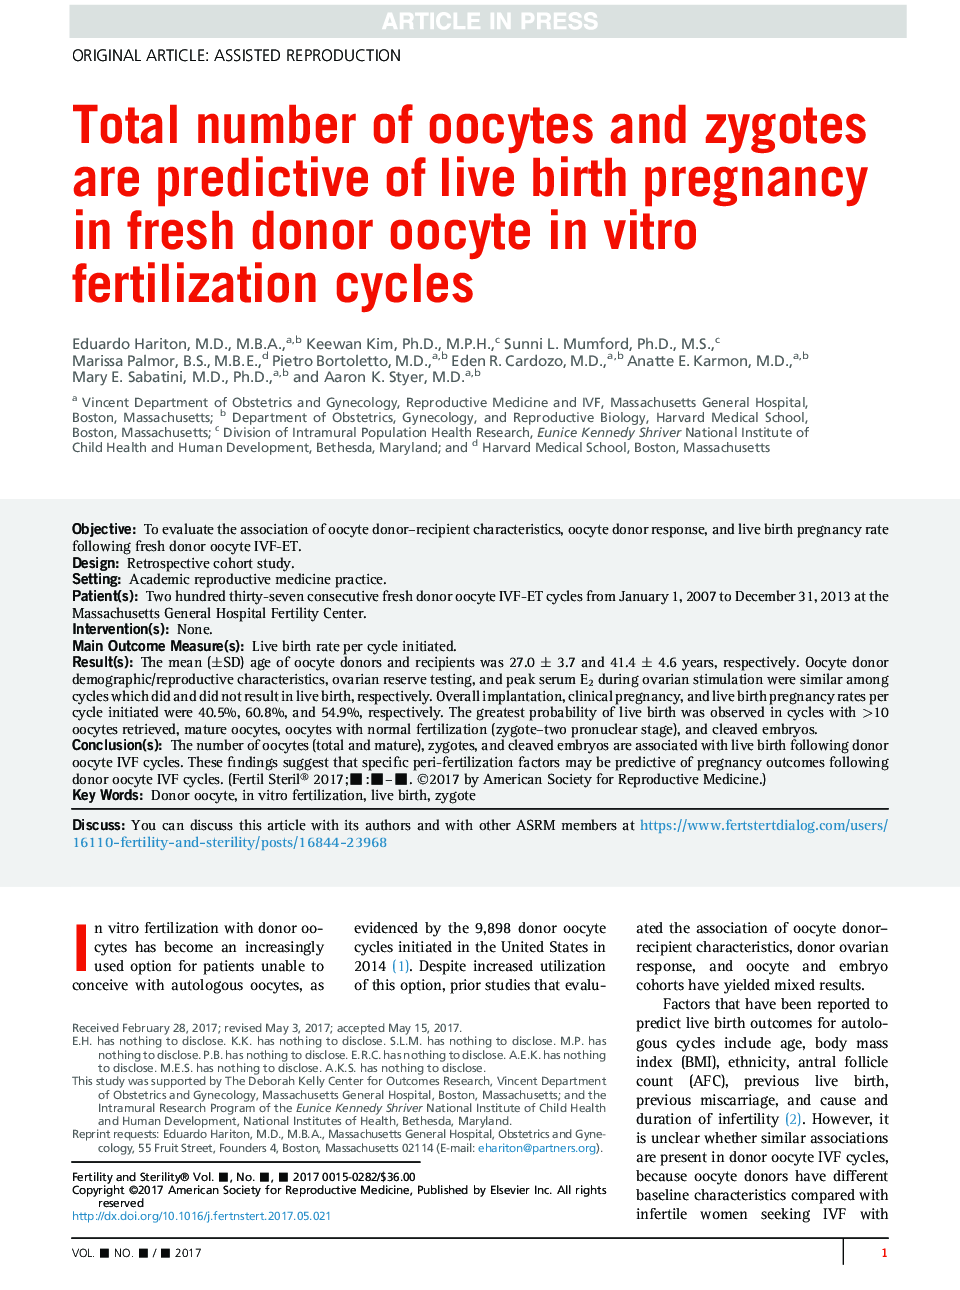 Total number of oocytes and zygotes are predictive of live birth pregnancy in fresh donor oocyte inÂ vitro fertilization cycles